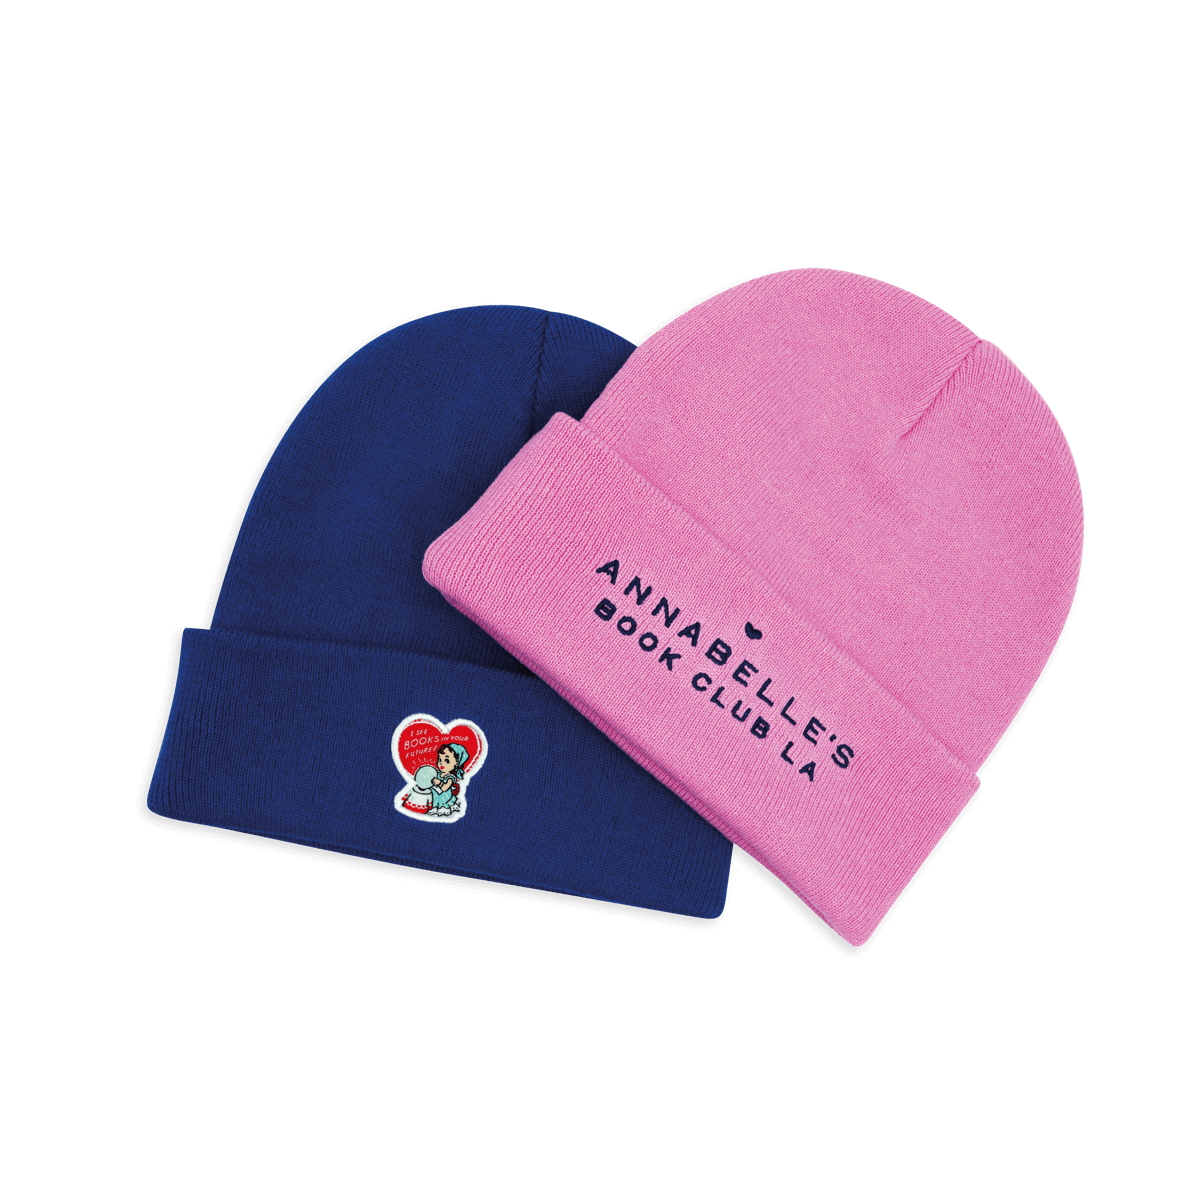 Two book themed beanie hats